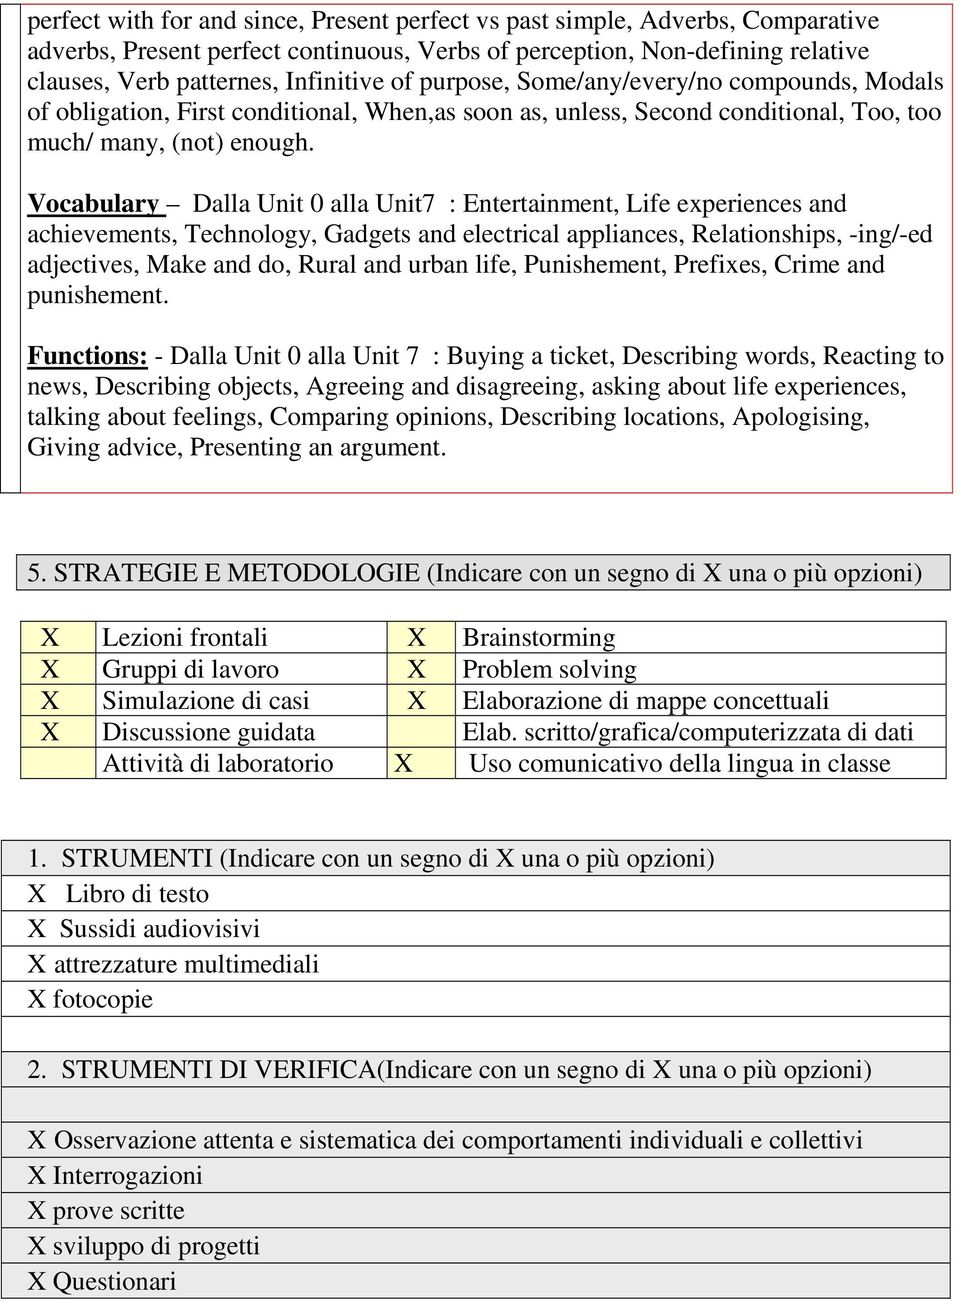 Vocabulary Dalla Unit 0 alla Unit7 : Entertainment, Life experiences and achievements, Technology, Gadgets and electrical appliances, Relationships, -ing/-ed adjectives, Make and do, Rural and urban